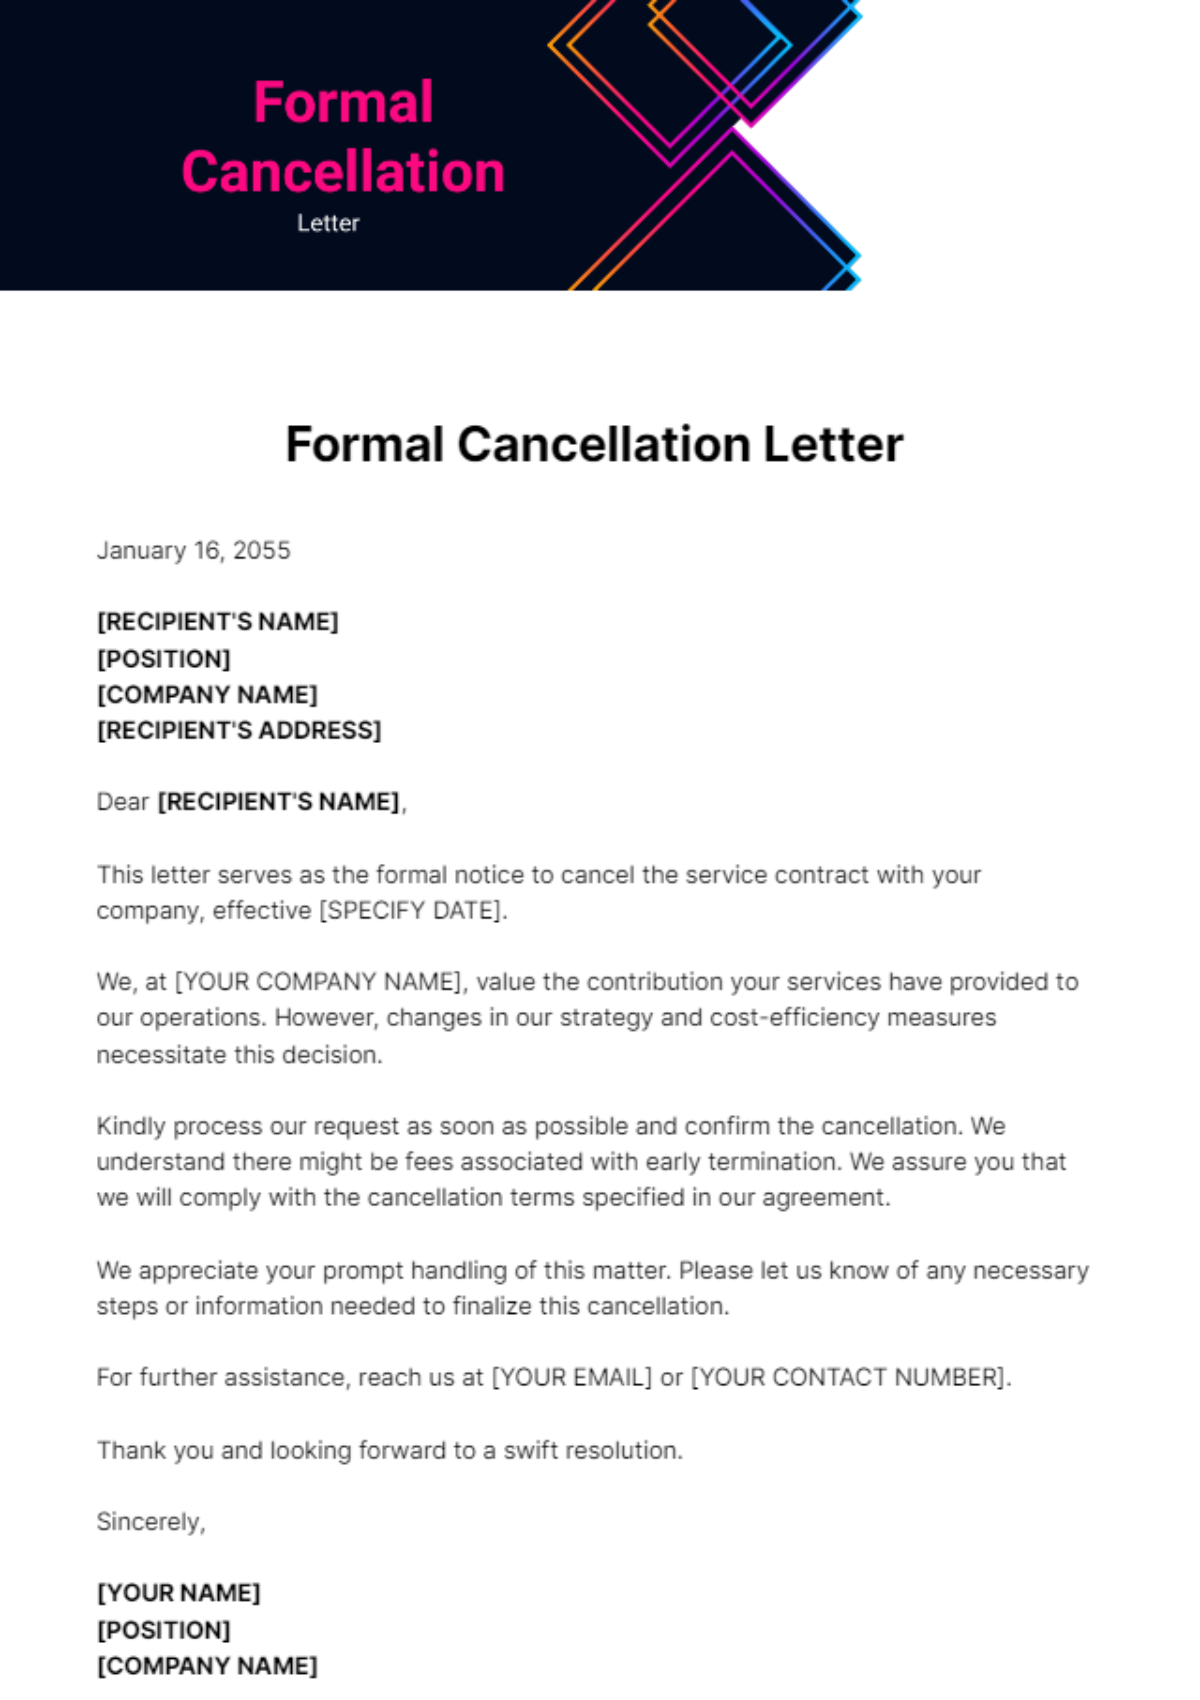 Free Formal Cancellation Letter Template